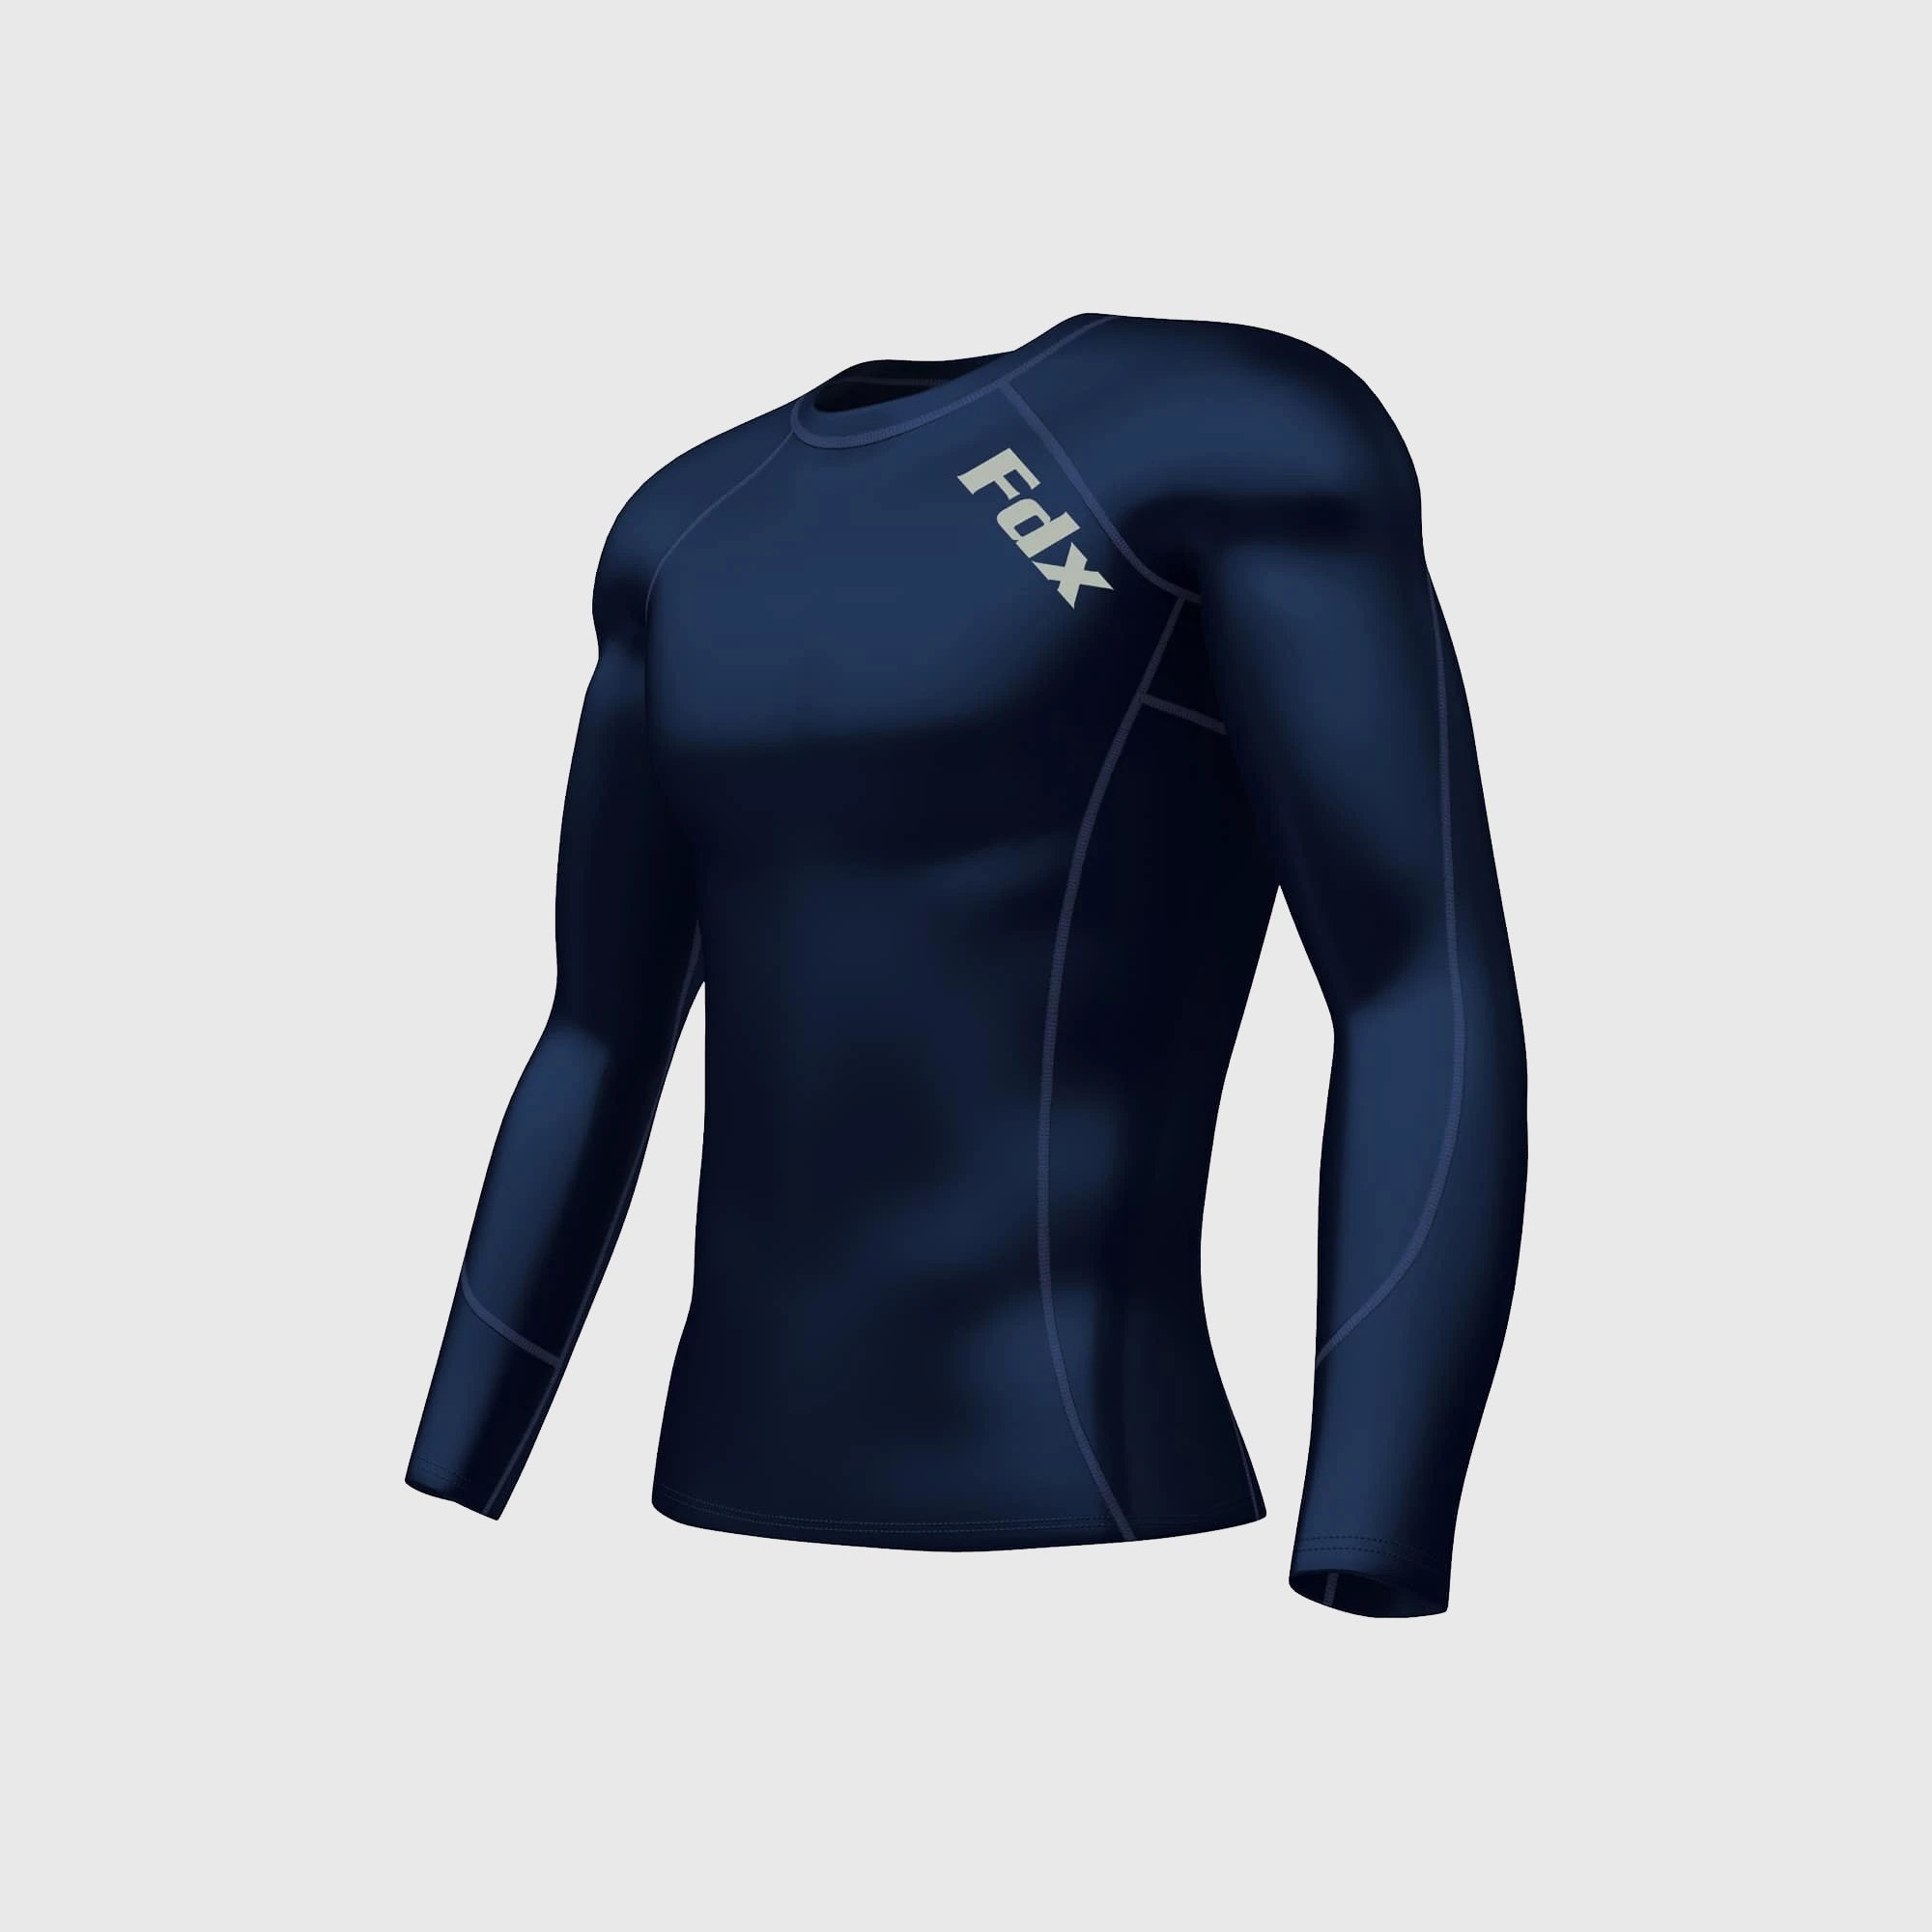 Fdx Men's Navy Blue Long Sleeve Compression Top Running Gym Workout Wear Rash Guard Stretchable Breathable - Thermolinx